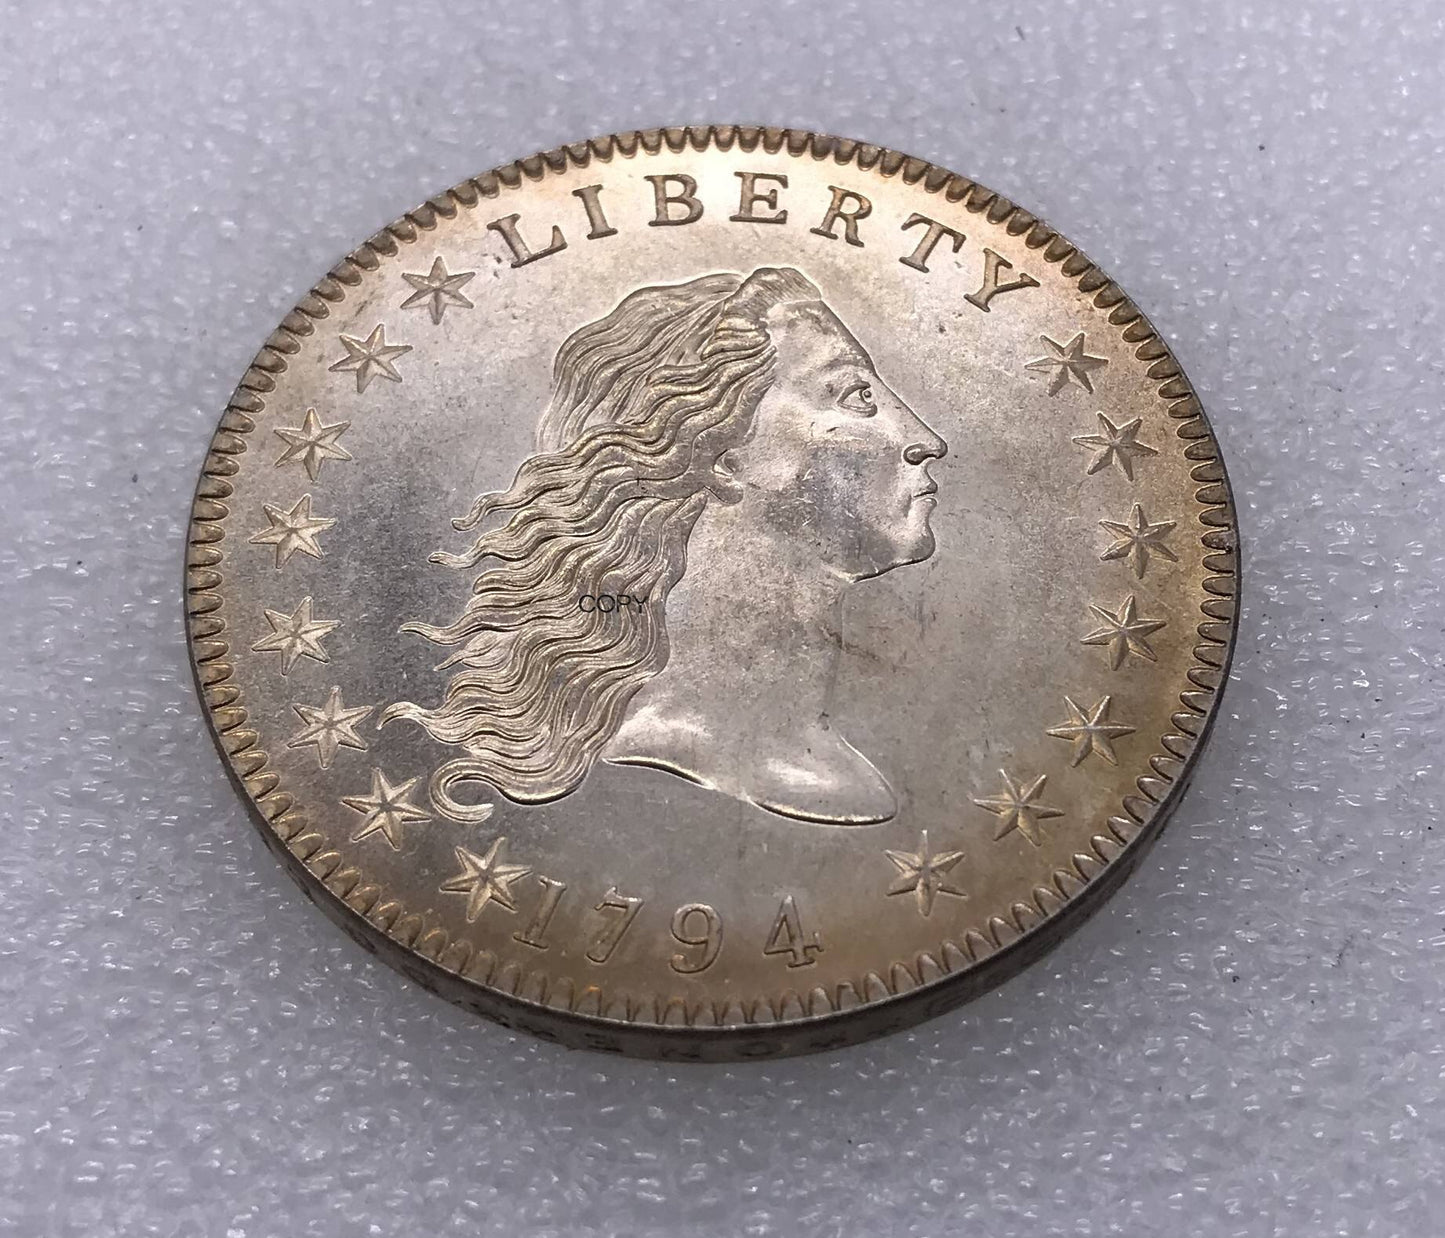 United States Of America Coin 1794 Liberty Flowing Hair One Dollar Cupronickel Silver Plated Old Souvenir gift Collectible Coins